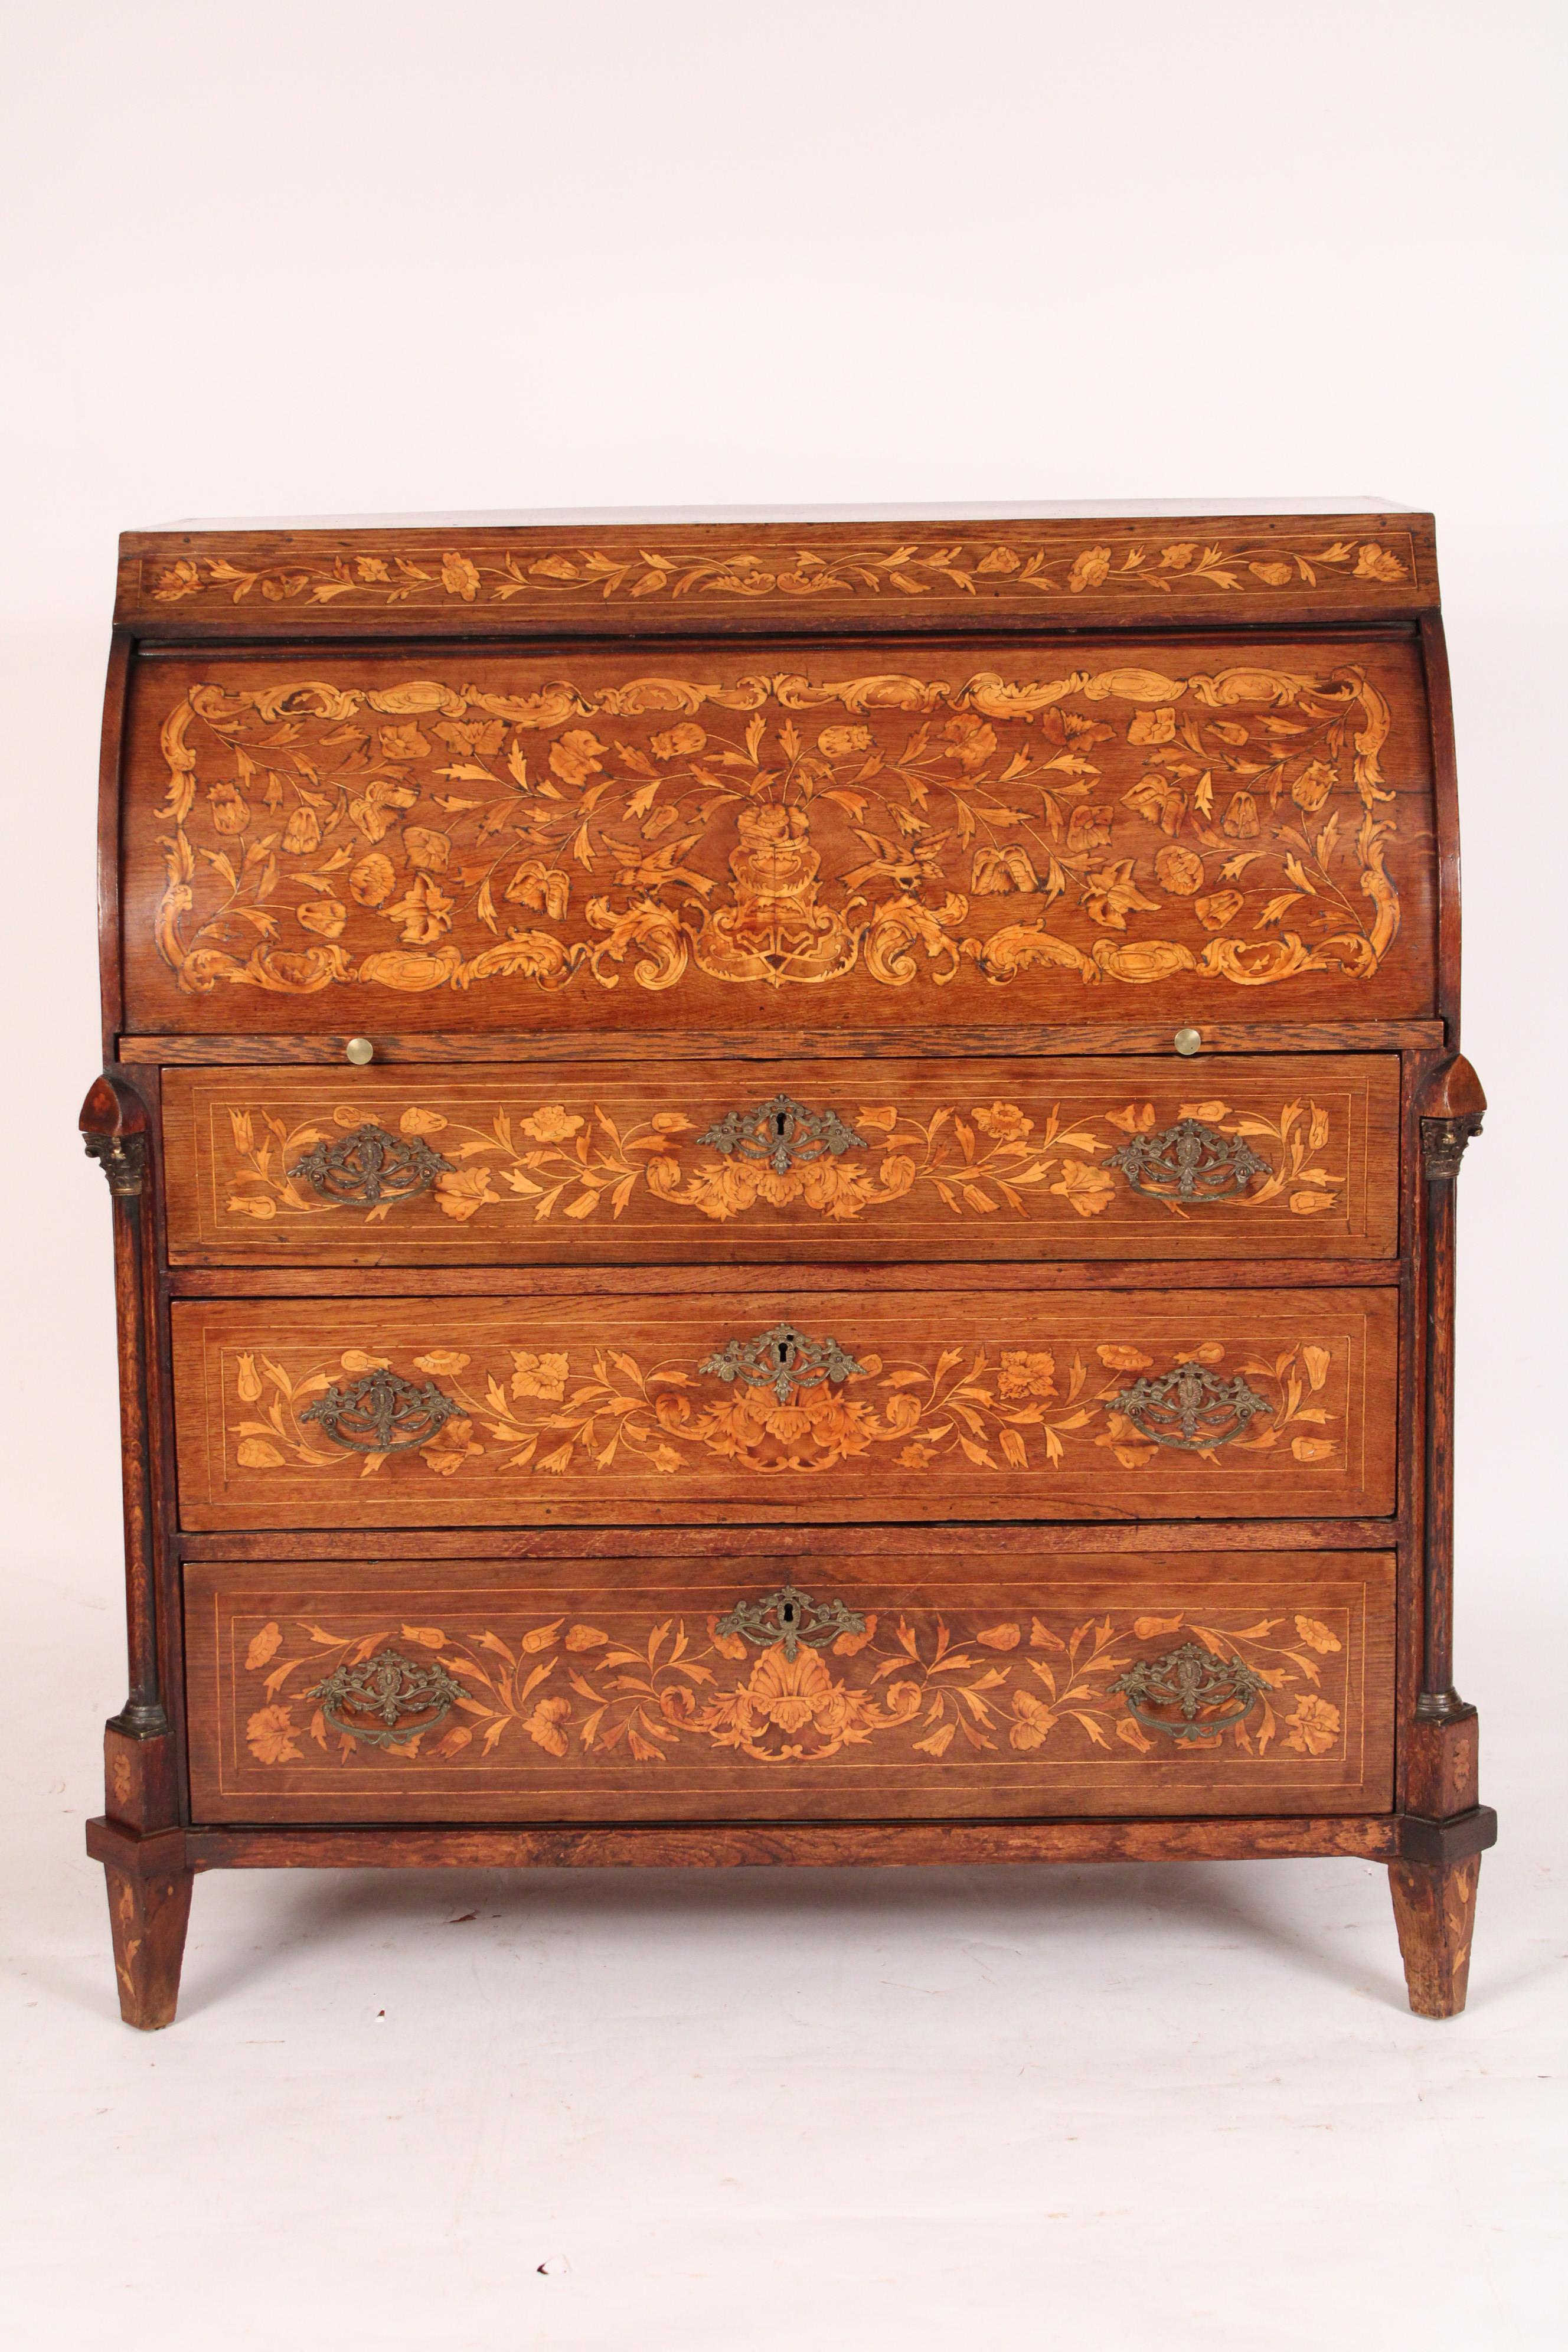 Dutch marquetry cylinder desk, 19th century. The top with conch shell and floral inlay, exposed dove tails where top and sides meet, the cylinder with bird and floral inlay, the interior writing surface with a central prospect door with urn inlay,